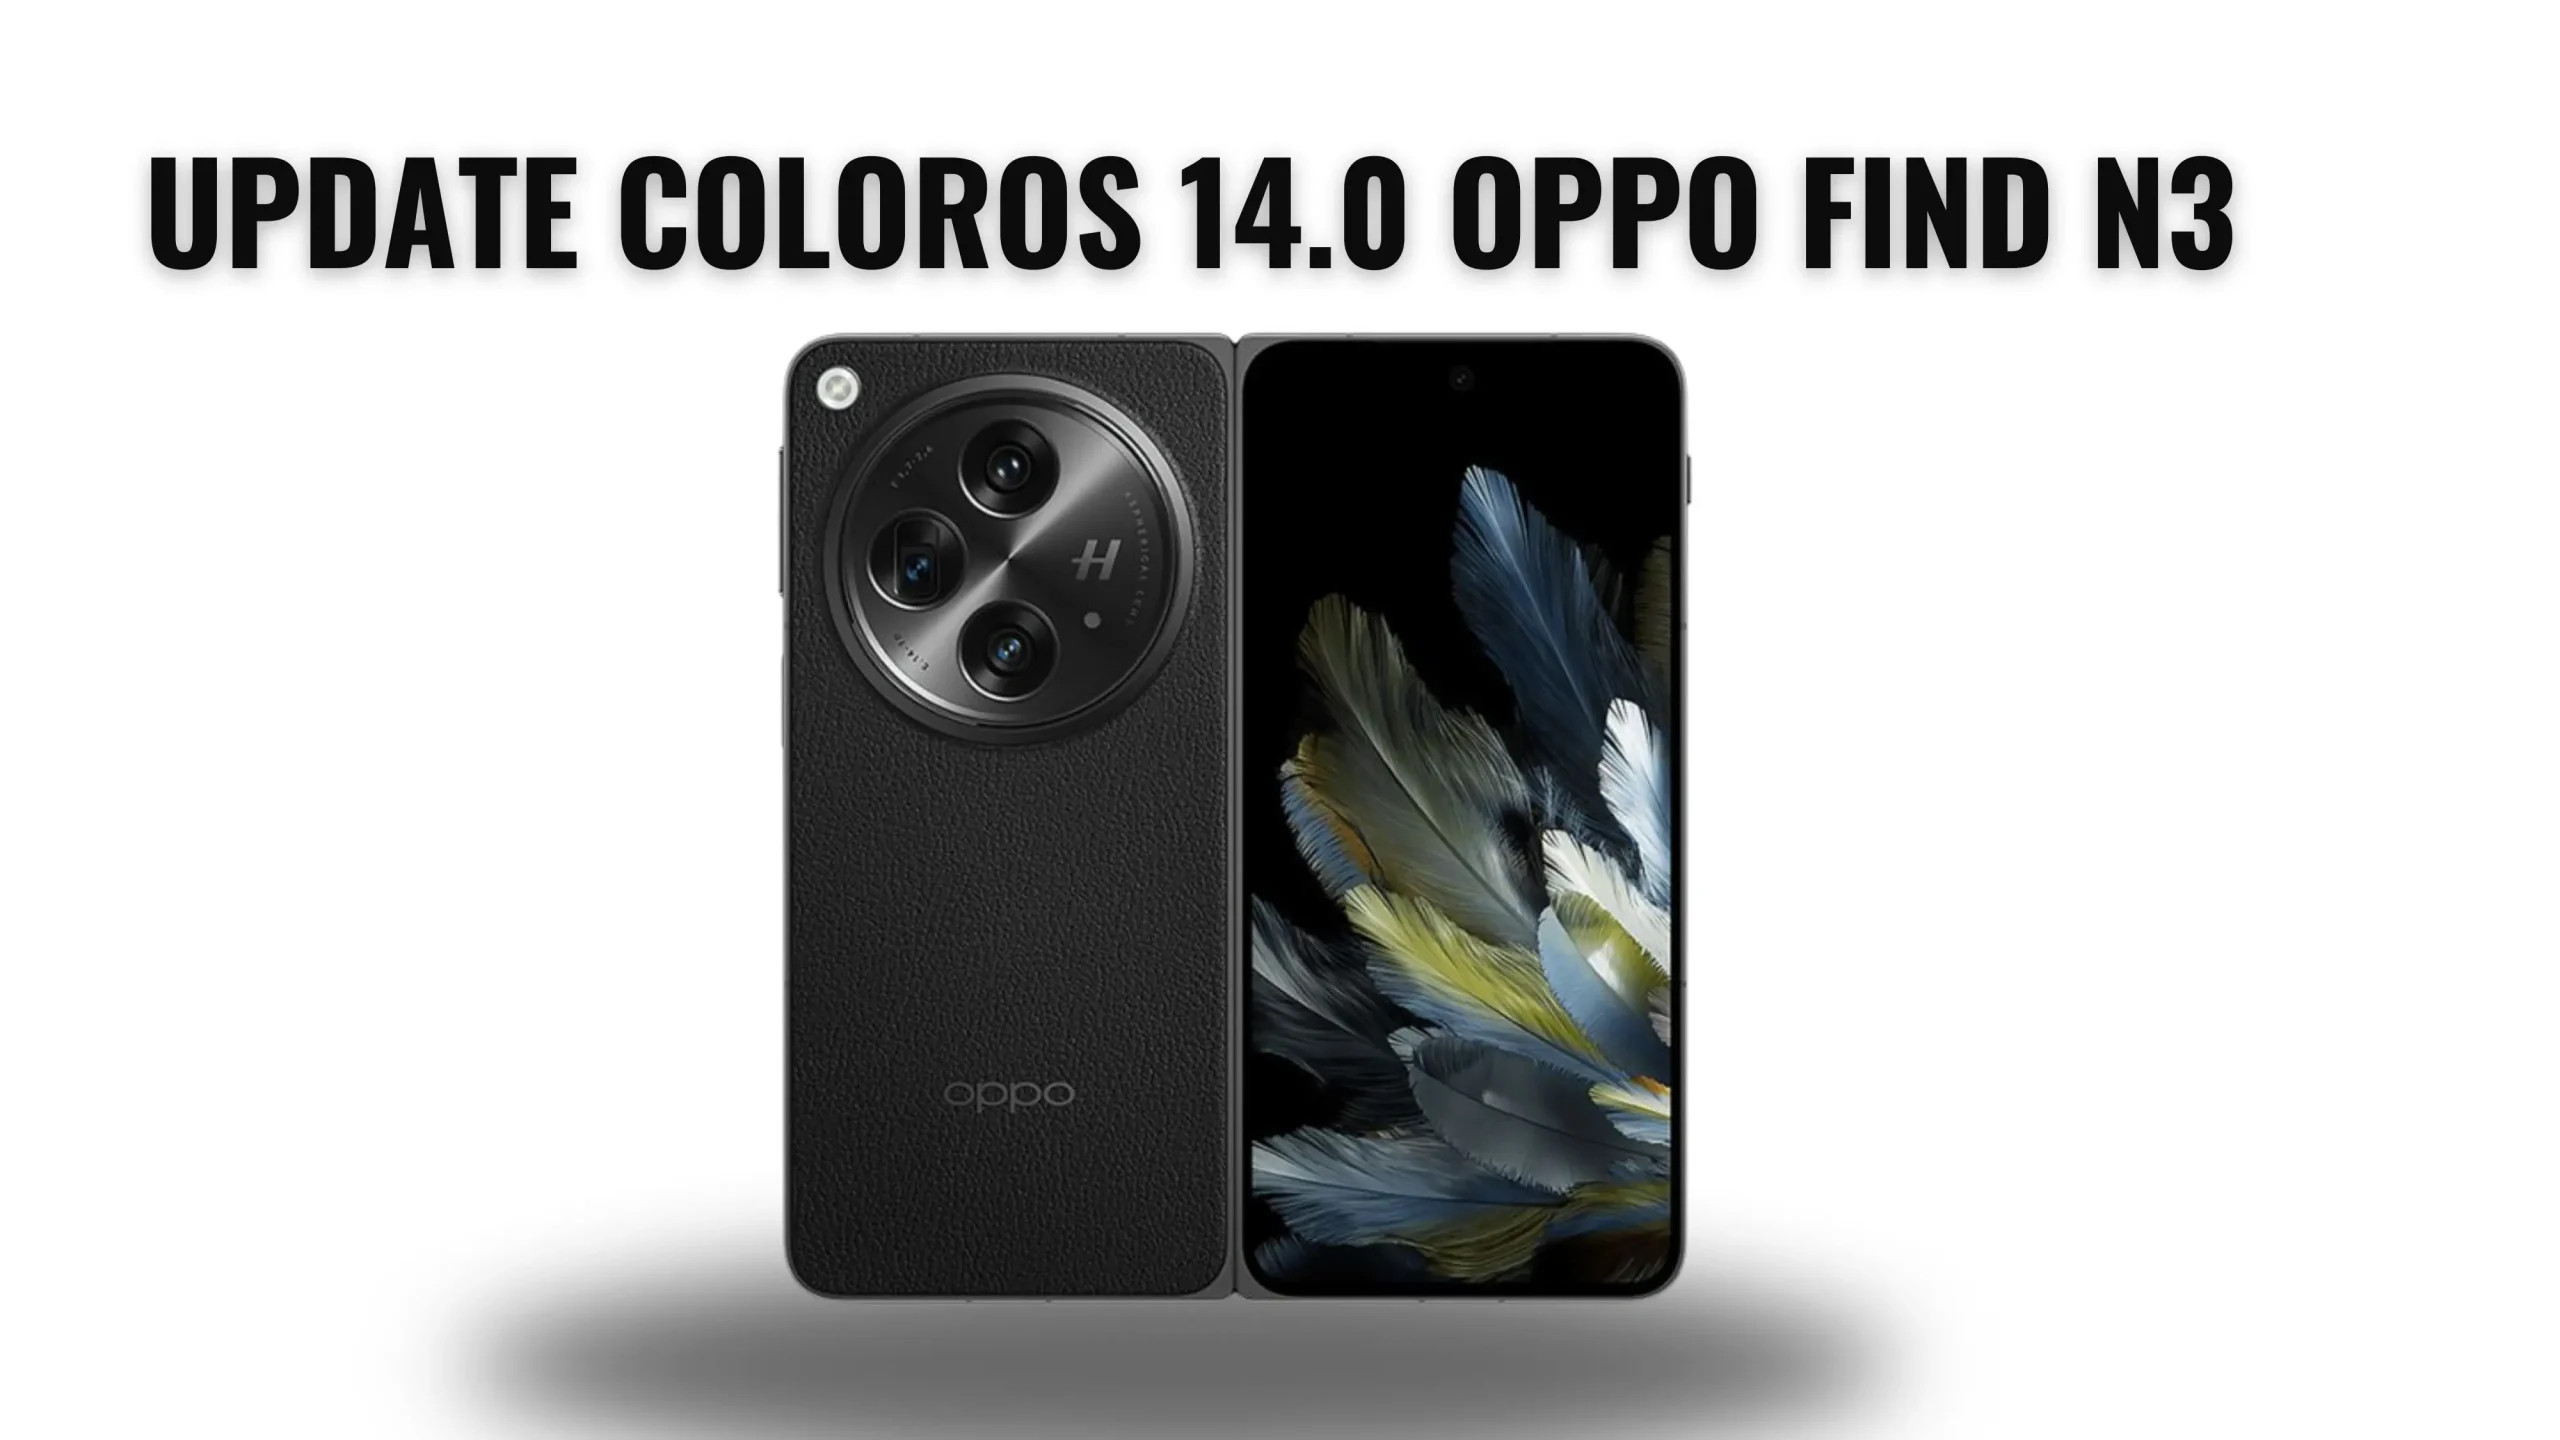 Update ColorOS 14.0 Stable for Oppo Find N3, Oppo Find N3 Collector's Edition, and Oppo Find N3 Flip Now Available